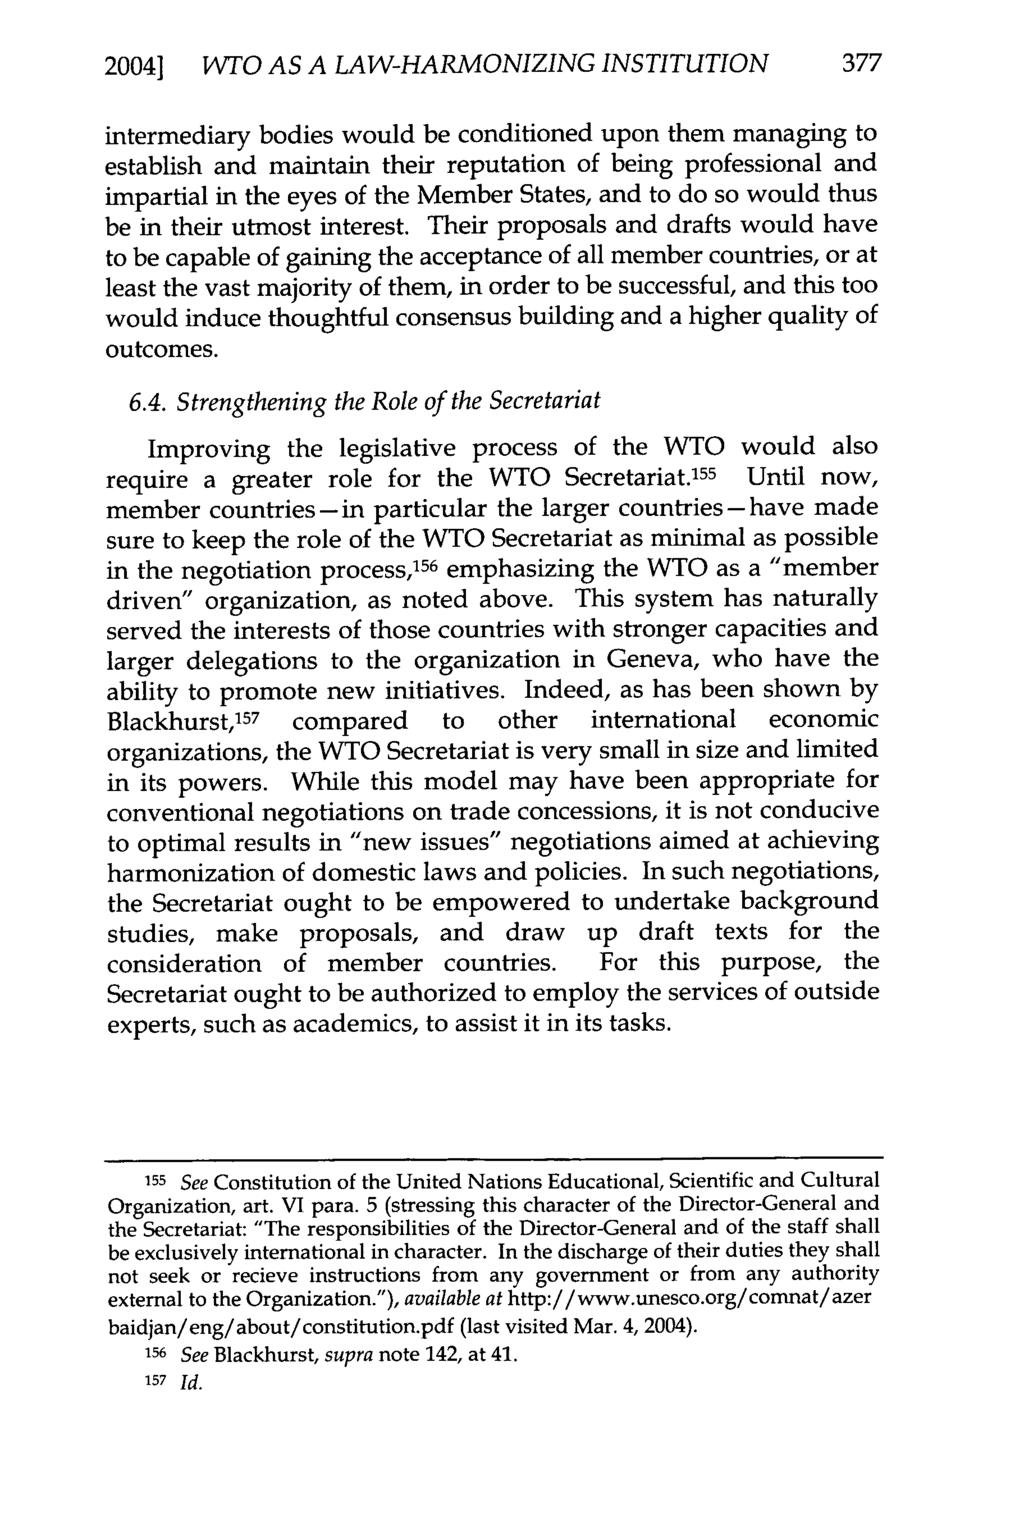 2004] IA/TO AS A LAW-HARMONIZING INSTITUTION 377 intermediary bodies would be conditioned upon them managing to establish and maintain their reputation of being professional and impartial in the eyes